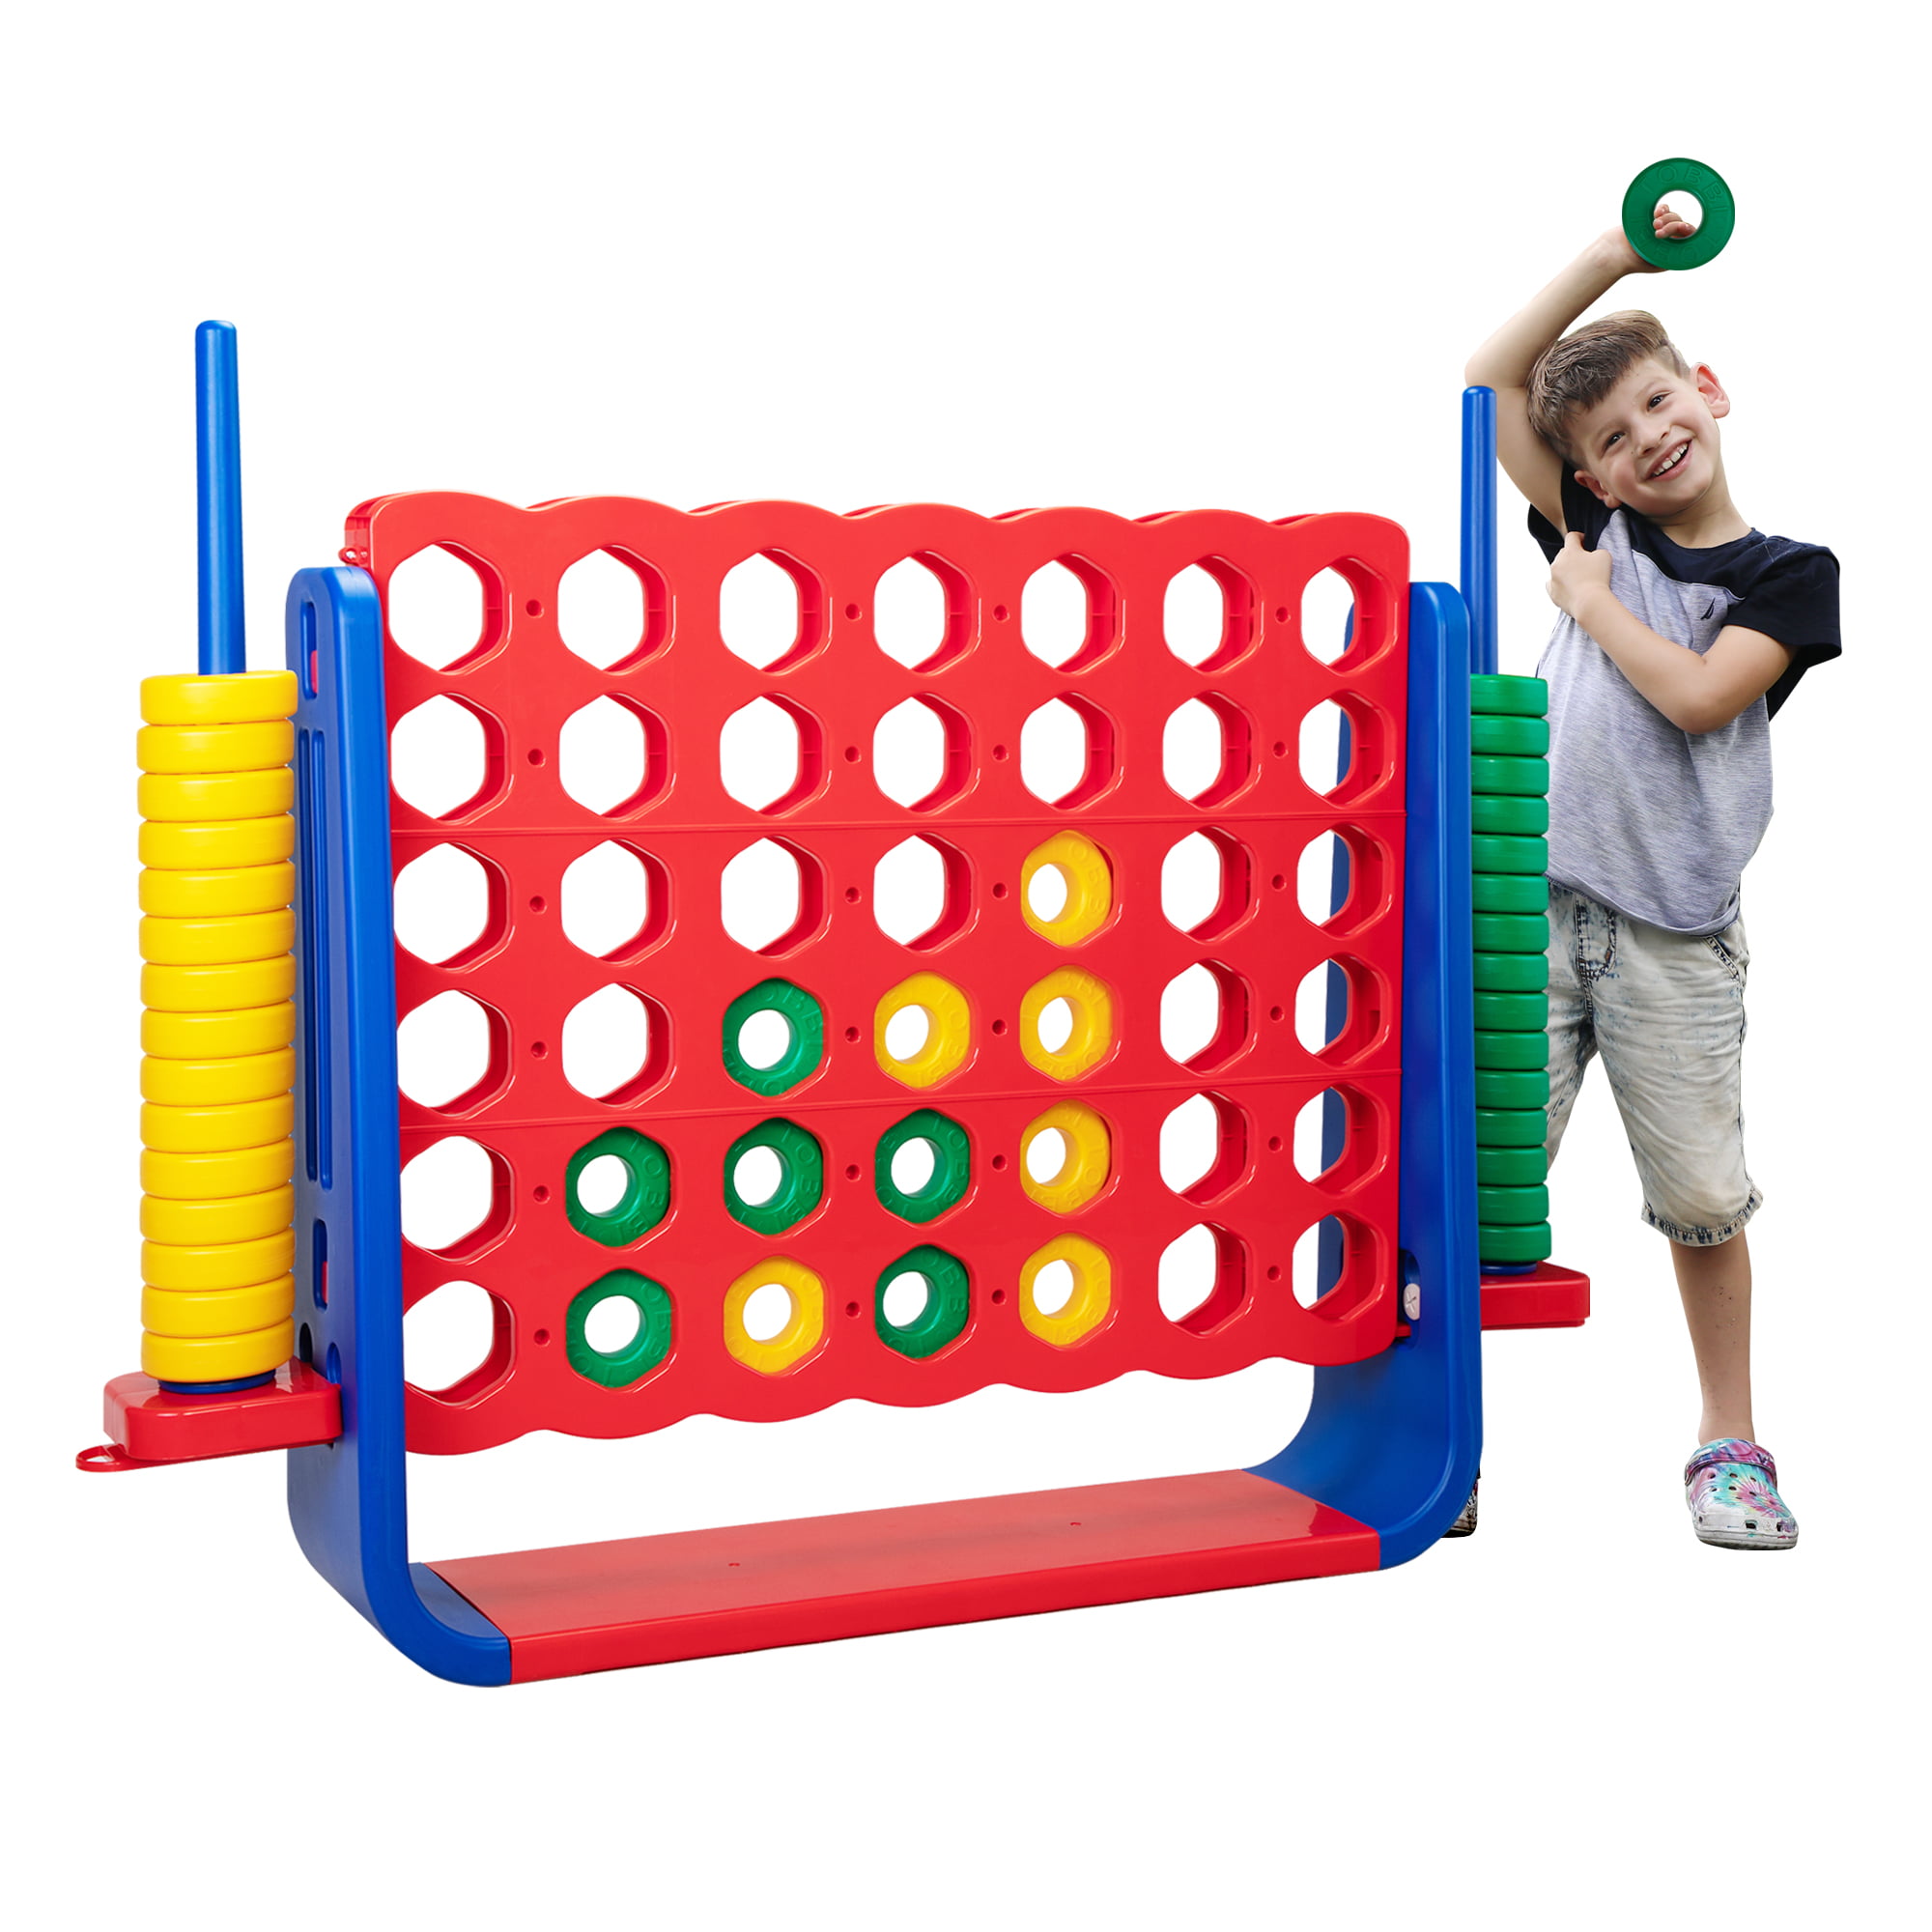 INFLATABLE CONNECT 4 OUTDOOR GARDEN GAME PARTY FOUR IN A ROW FAMILY FUN ACTIVITY 